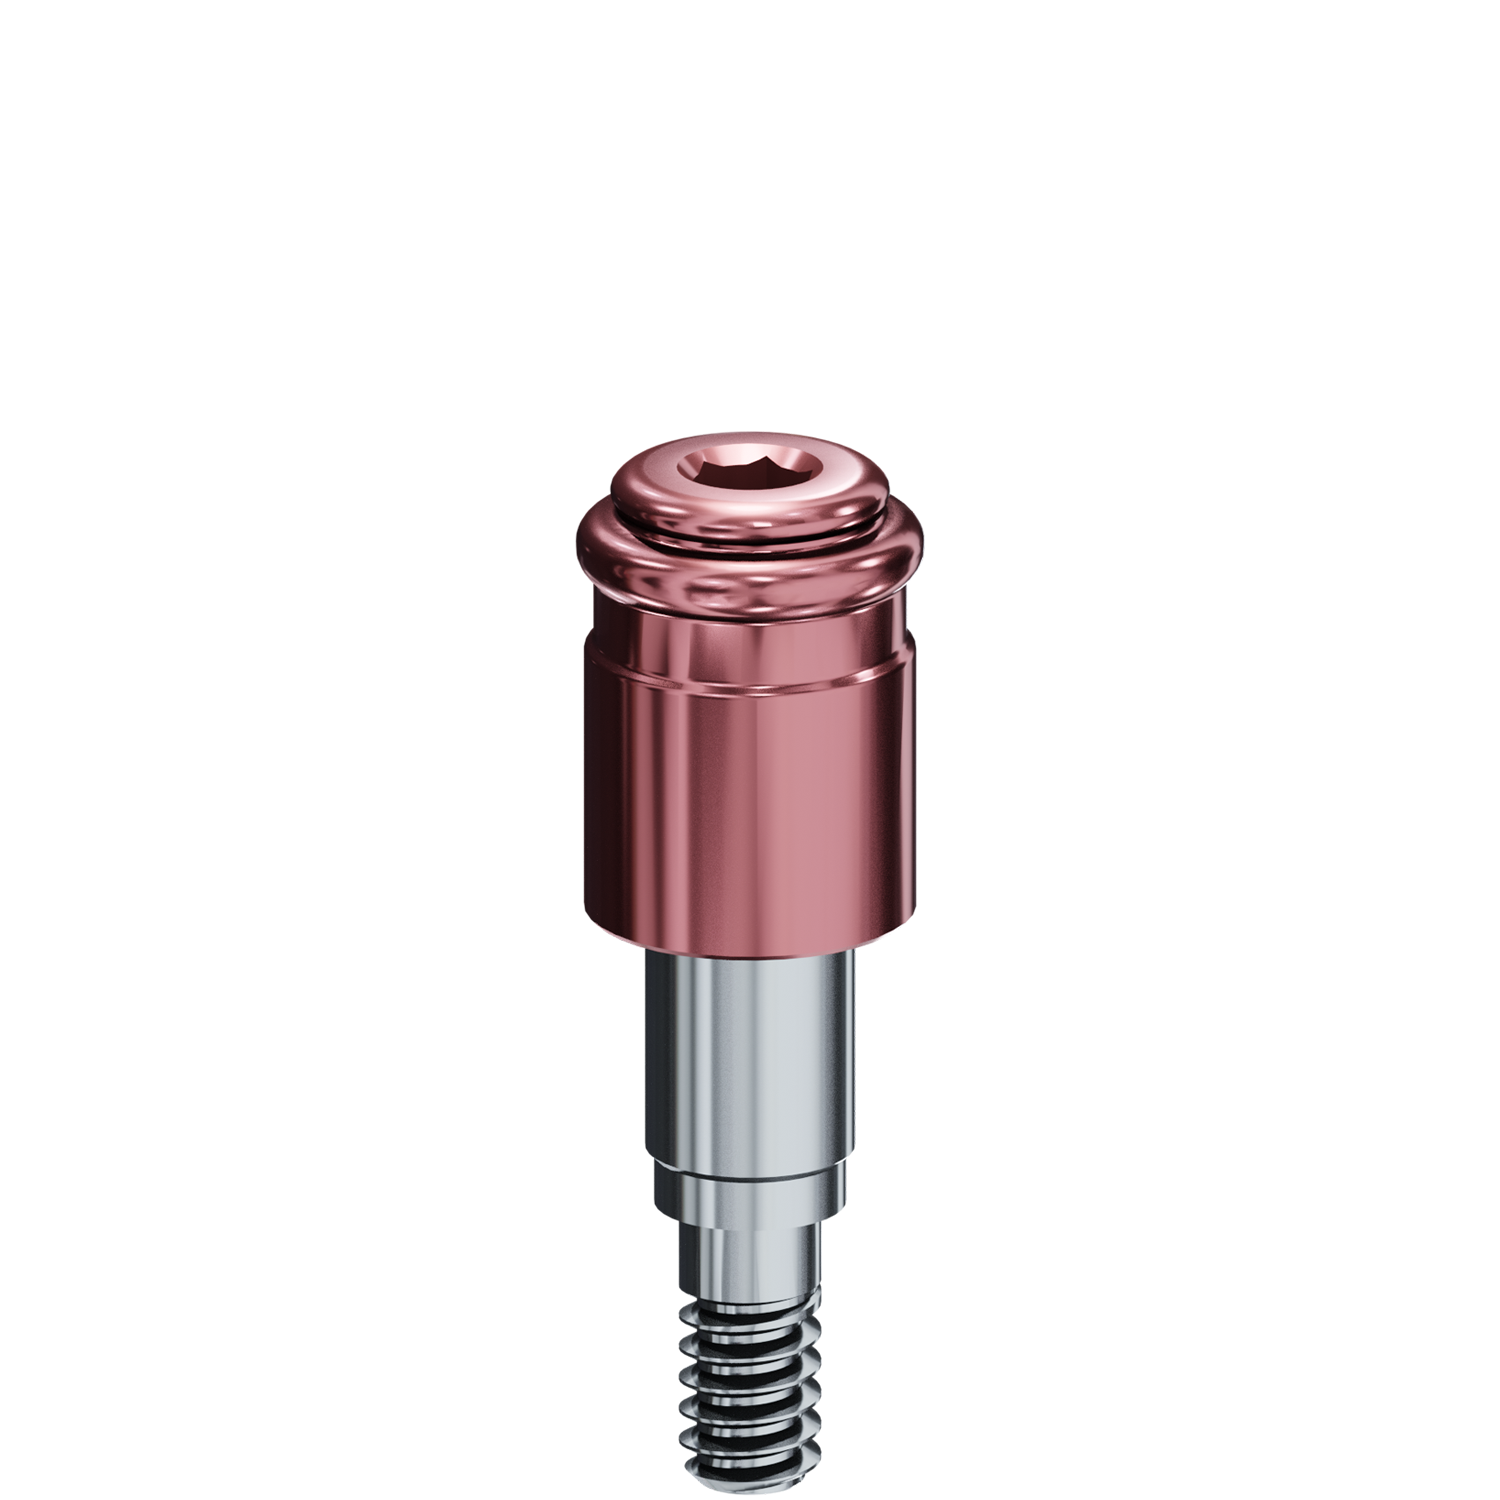 R-Tx Attachment System - 3.4mm Biomet 3i® Certain Connection - 048" Drive - 6.0mm